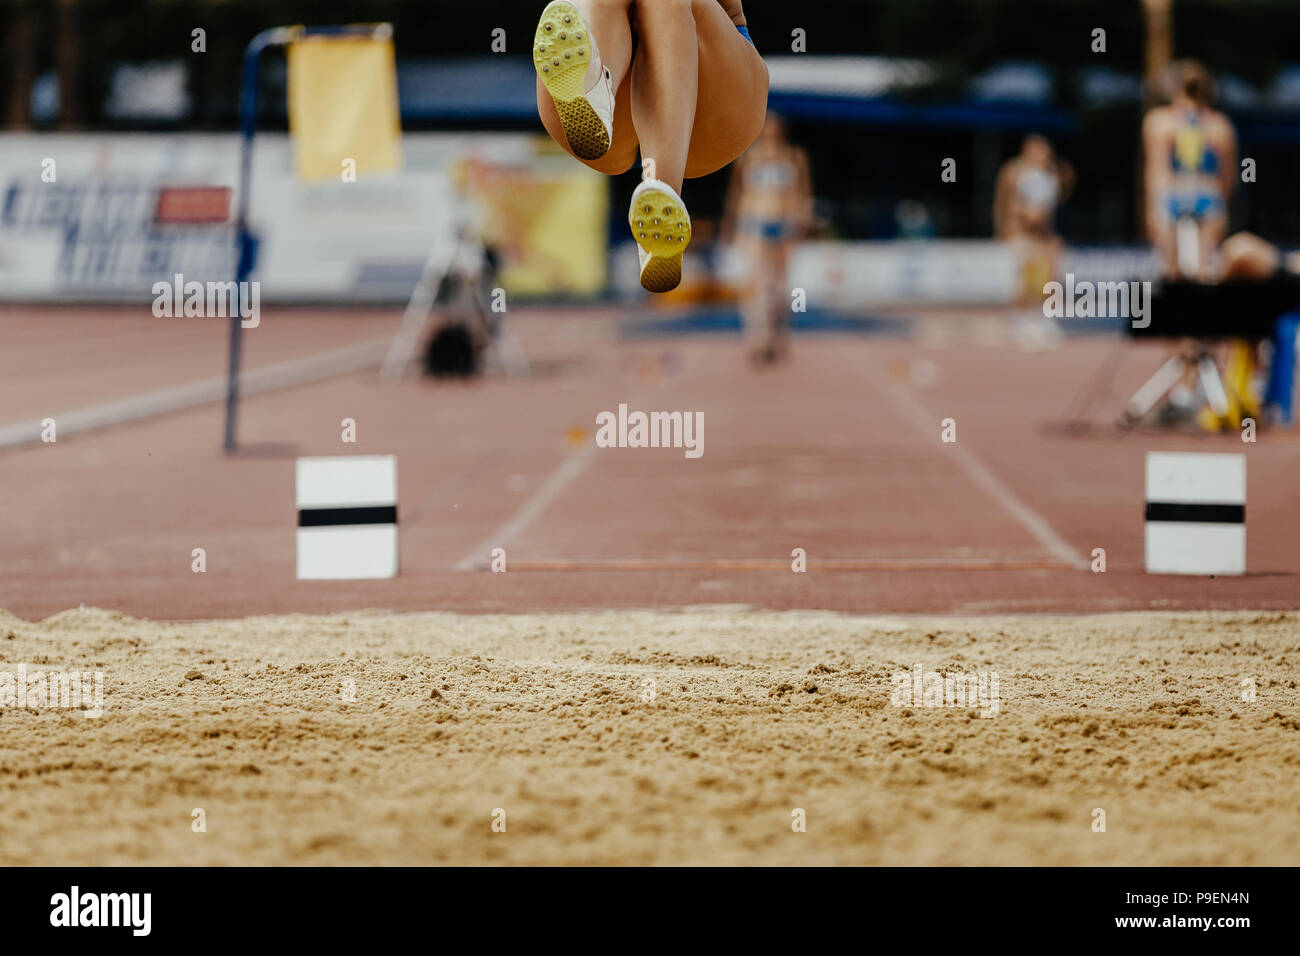 long jump woman legs athlete jumper competition athletics Stock Photo